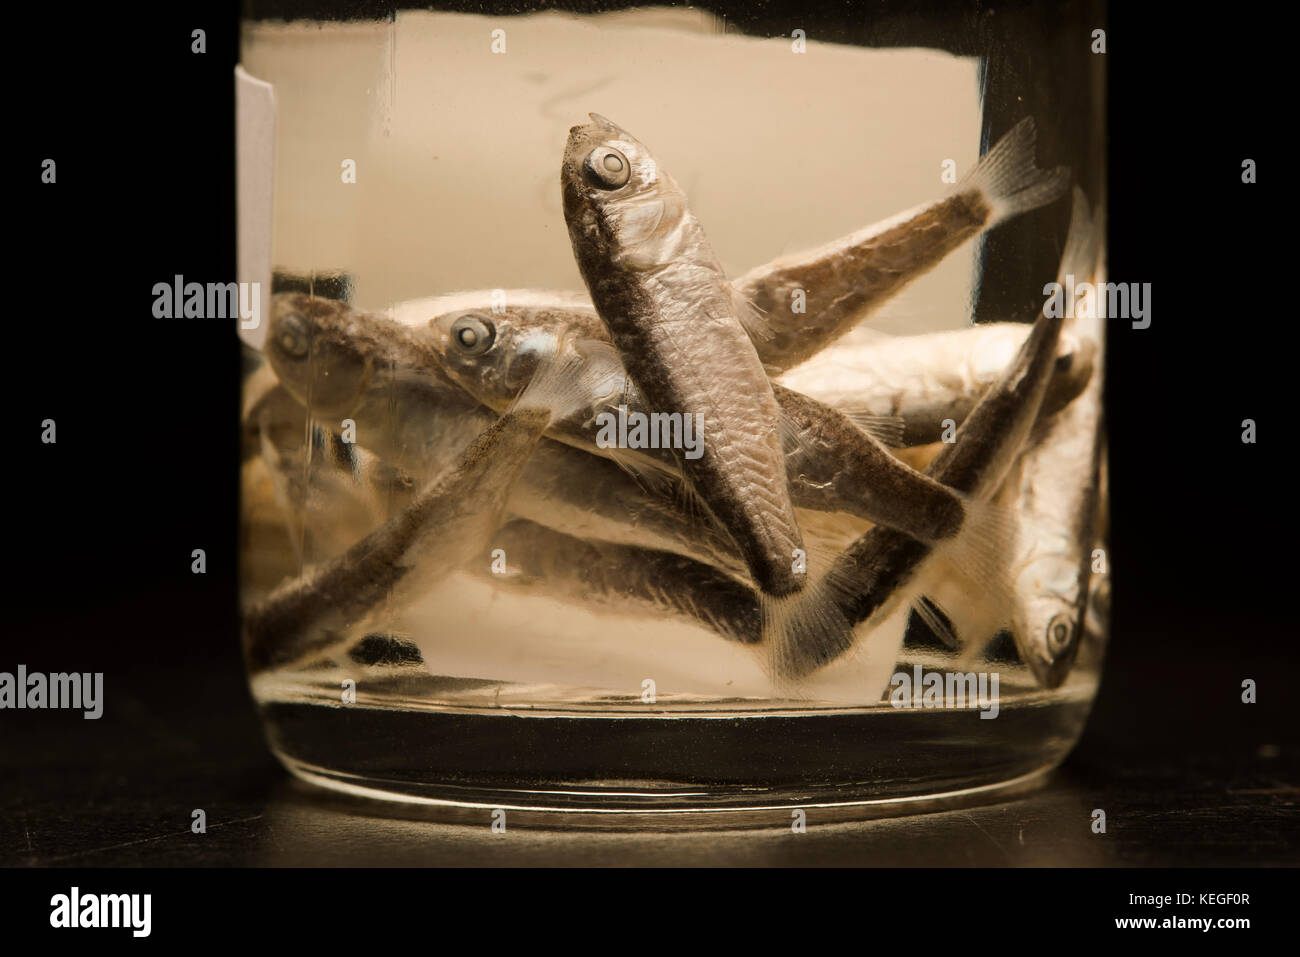 Fish collected from the Atlantic Ocean for a scientific study on fish abundance and spawning time. Both adult and larval fish. Stock Photo